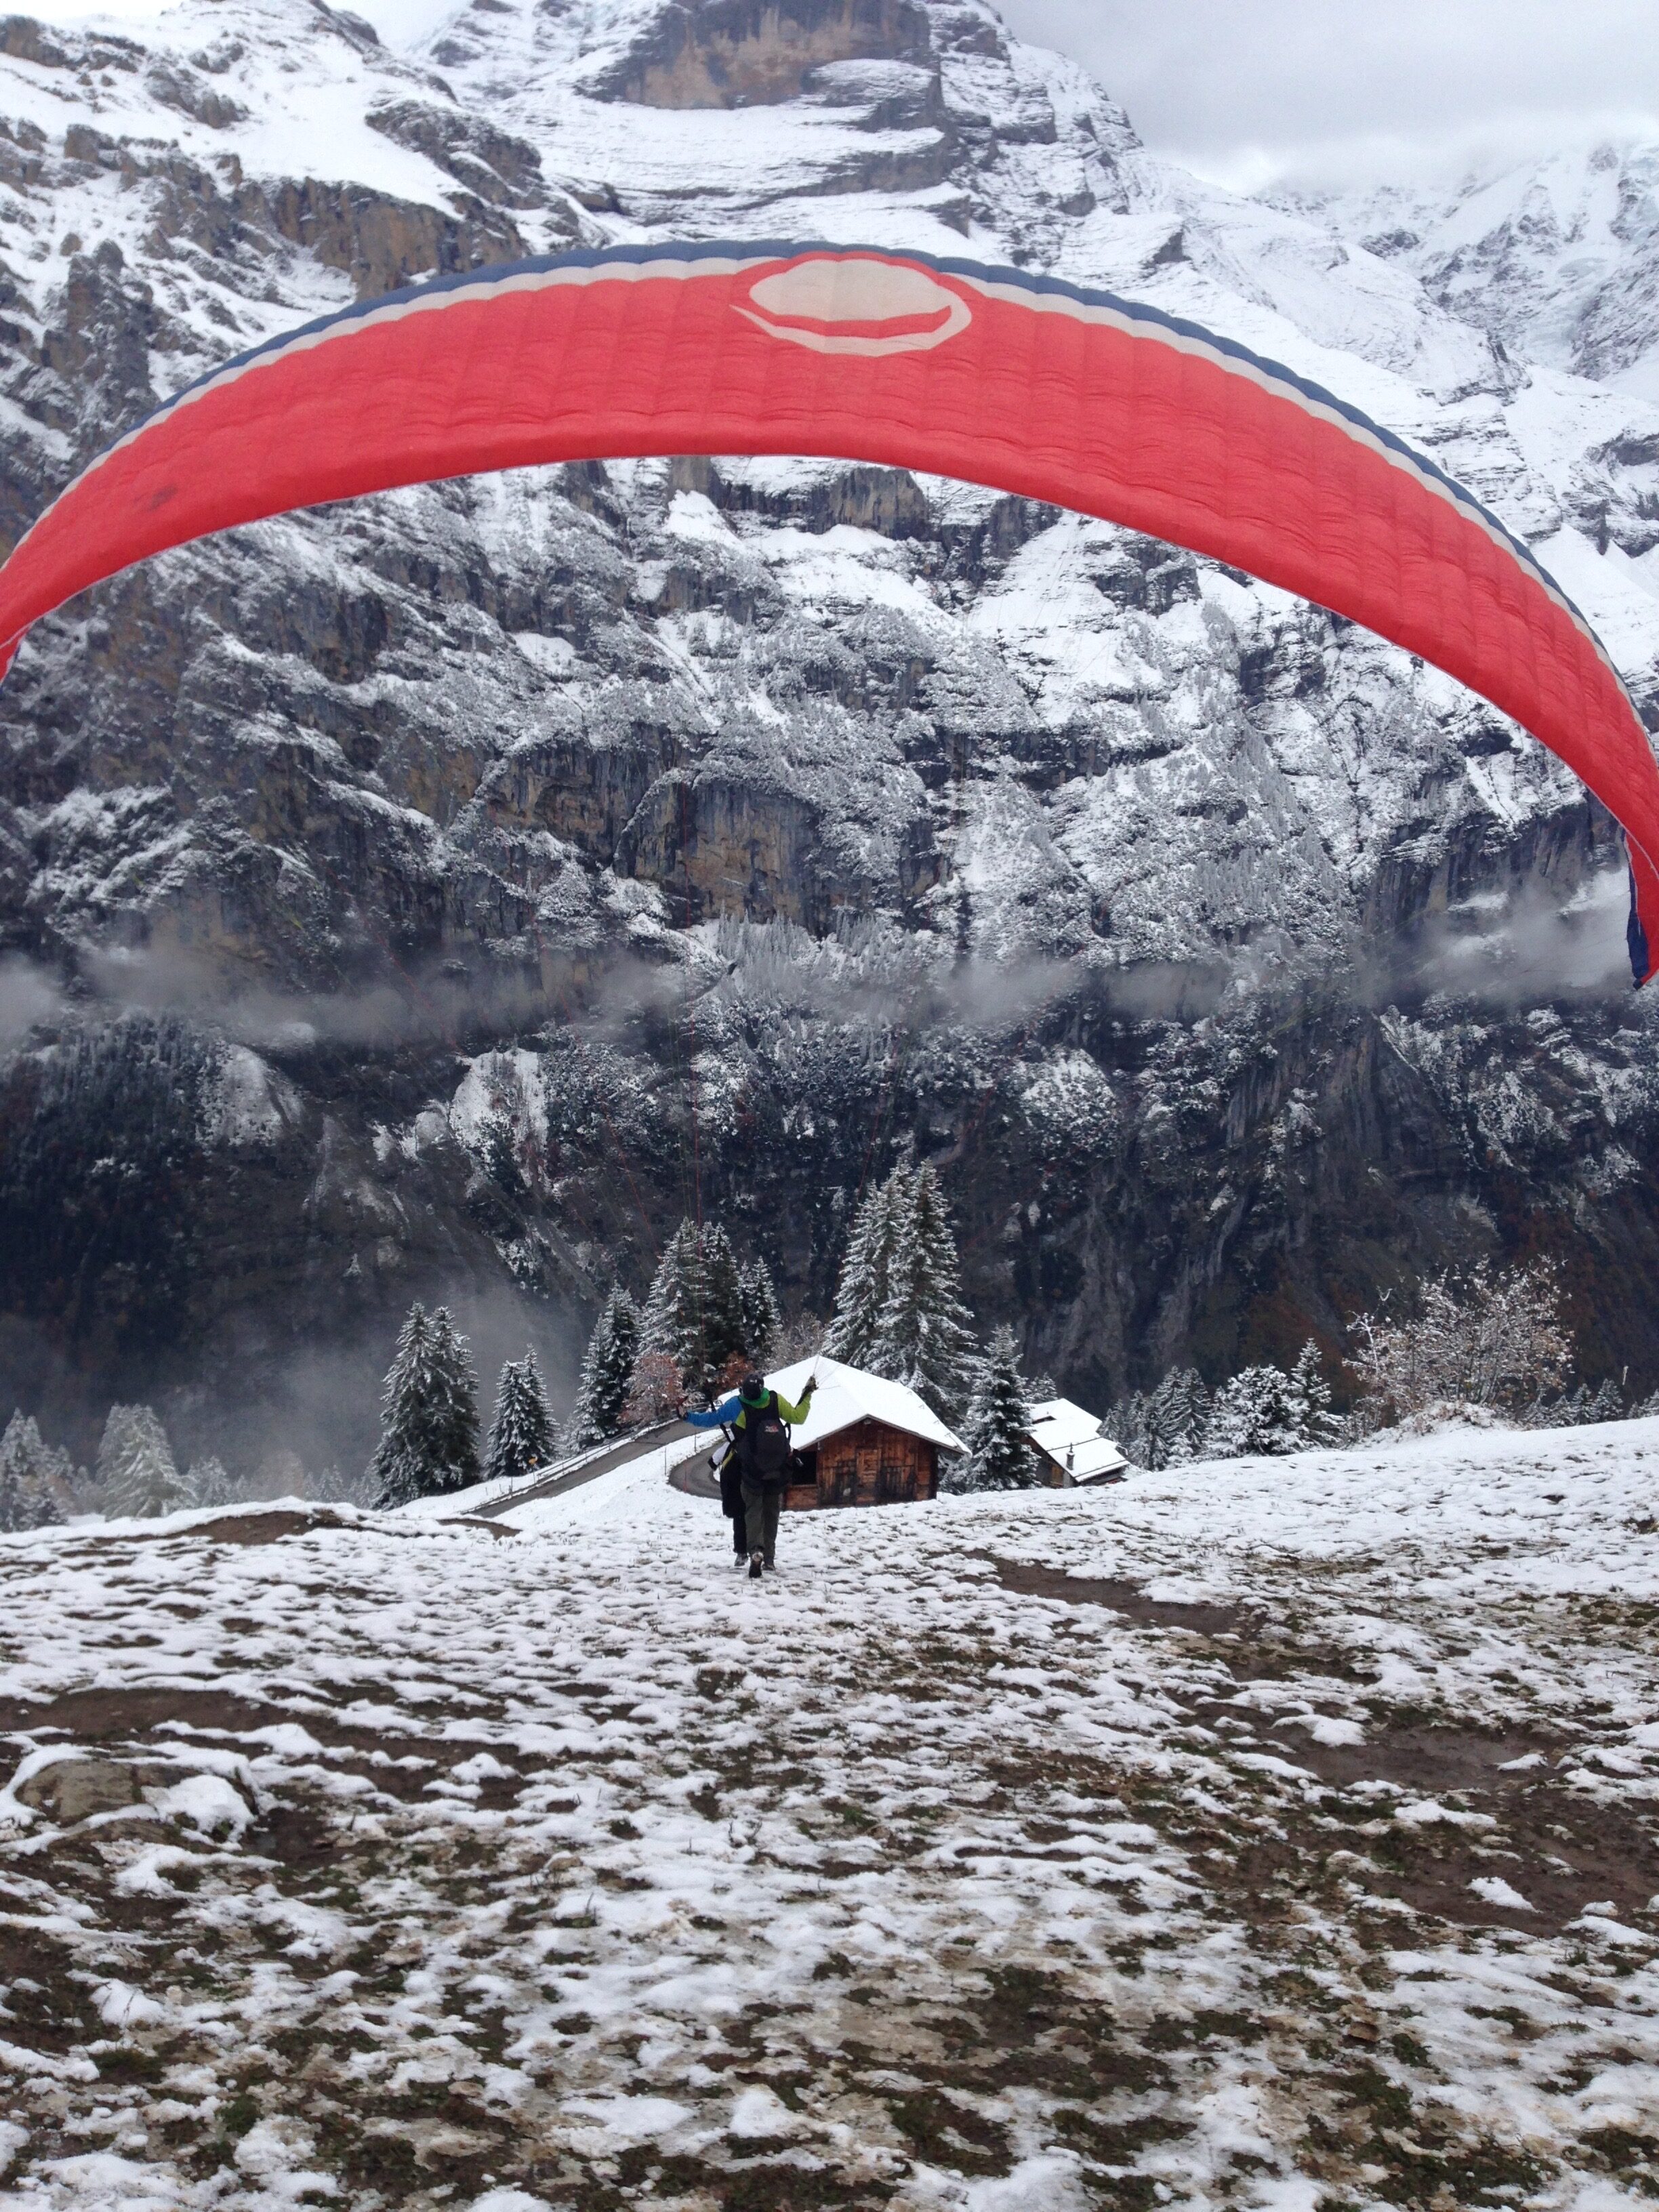 Paraglide launch with red sail and light snow in Swiss Alps